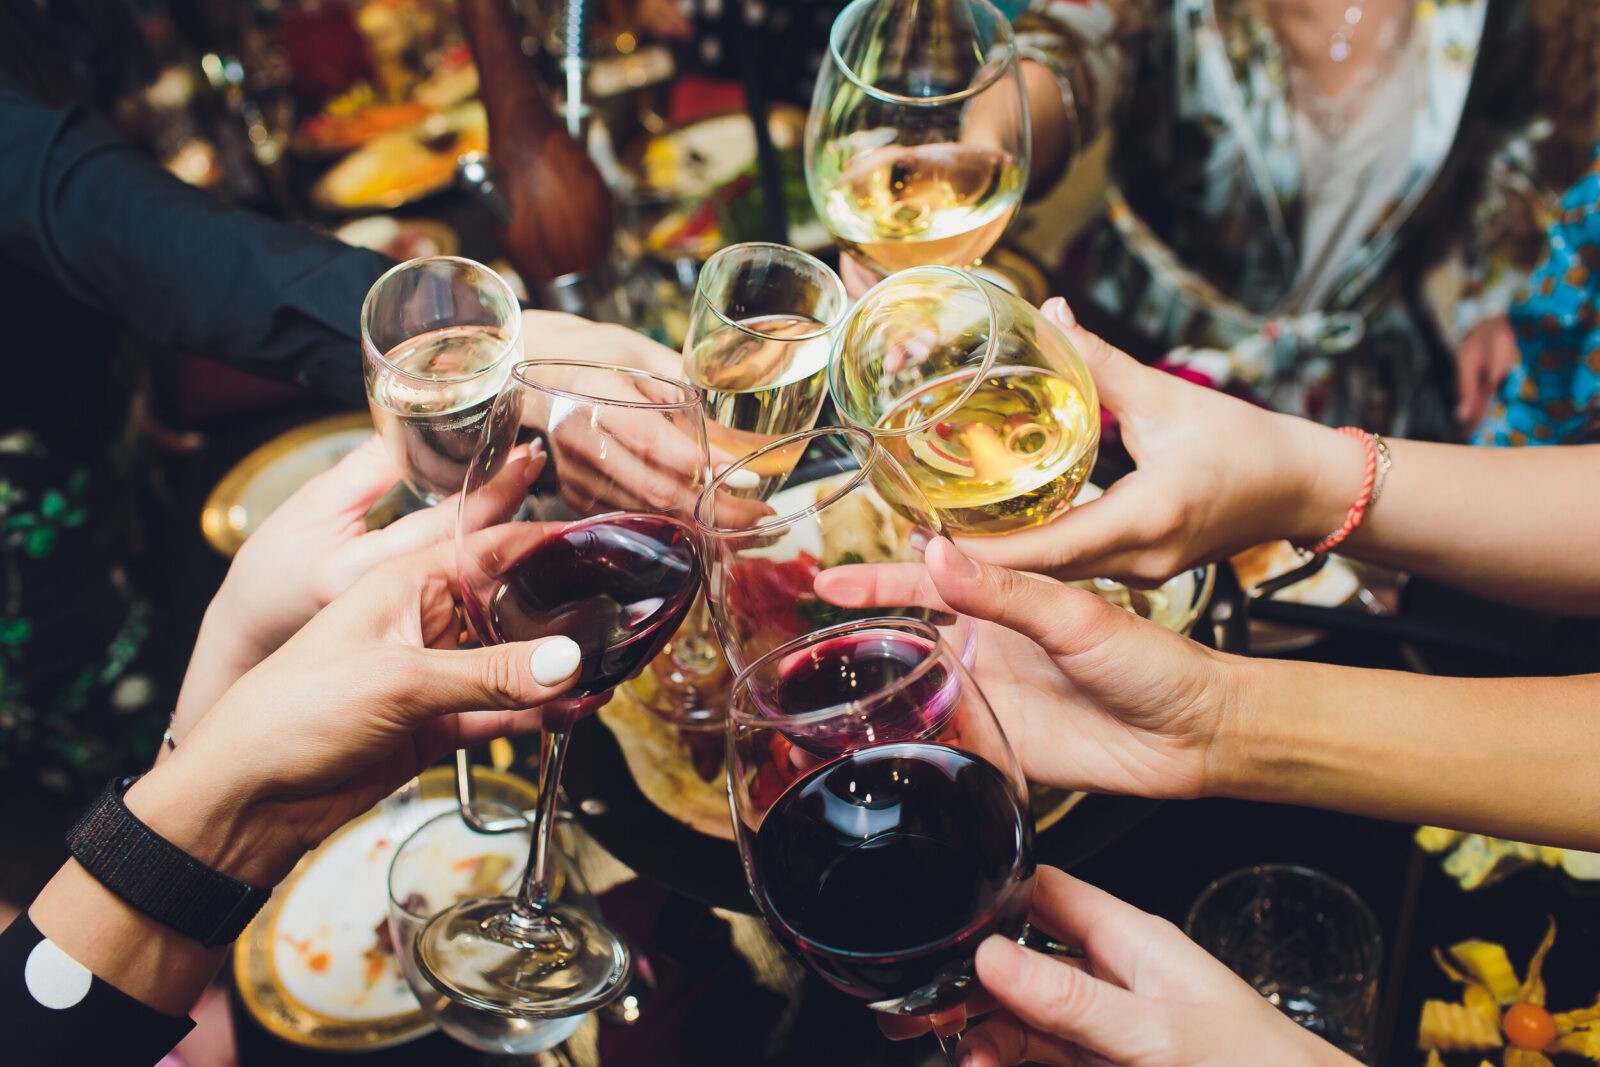 group of people celebrating with wine at restaurant